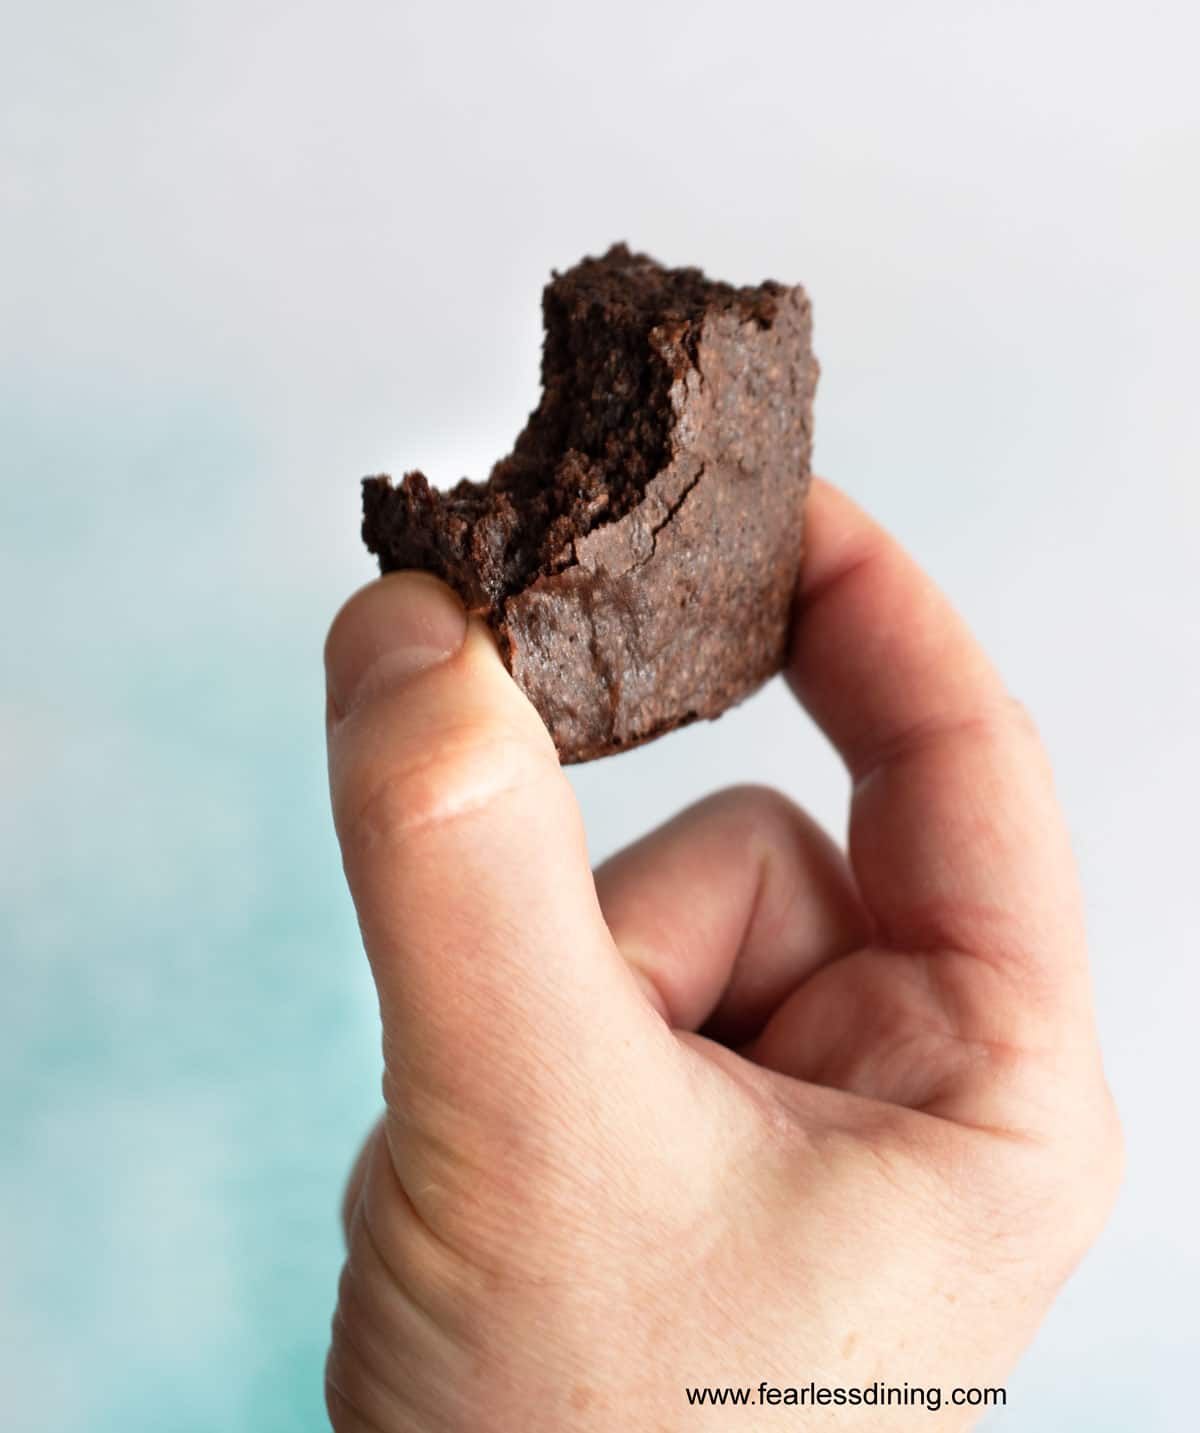 a hand holding up a brownie with a bite taken out